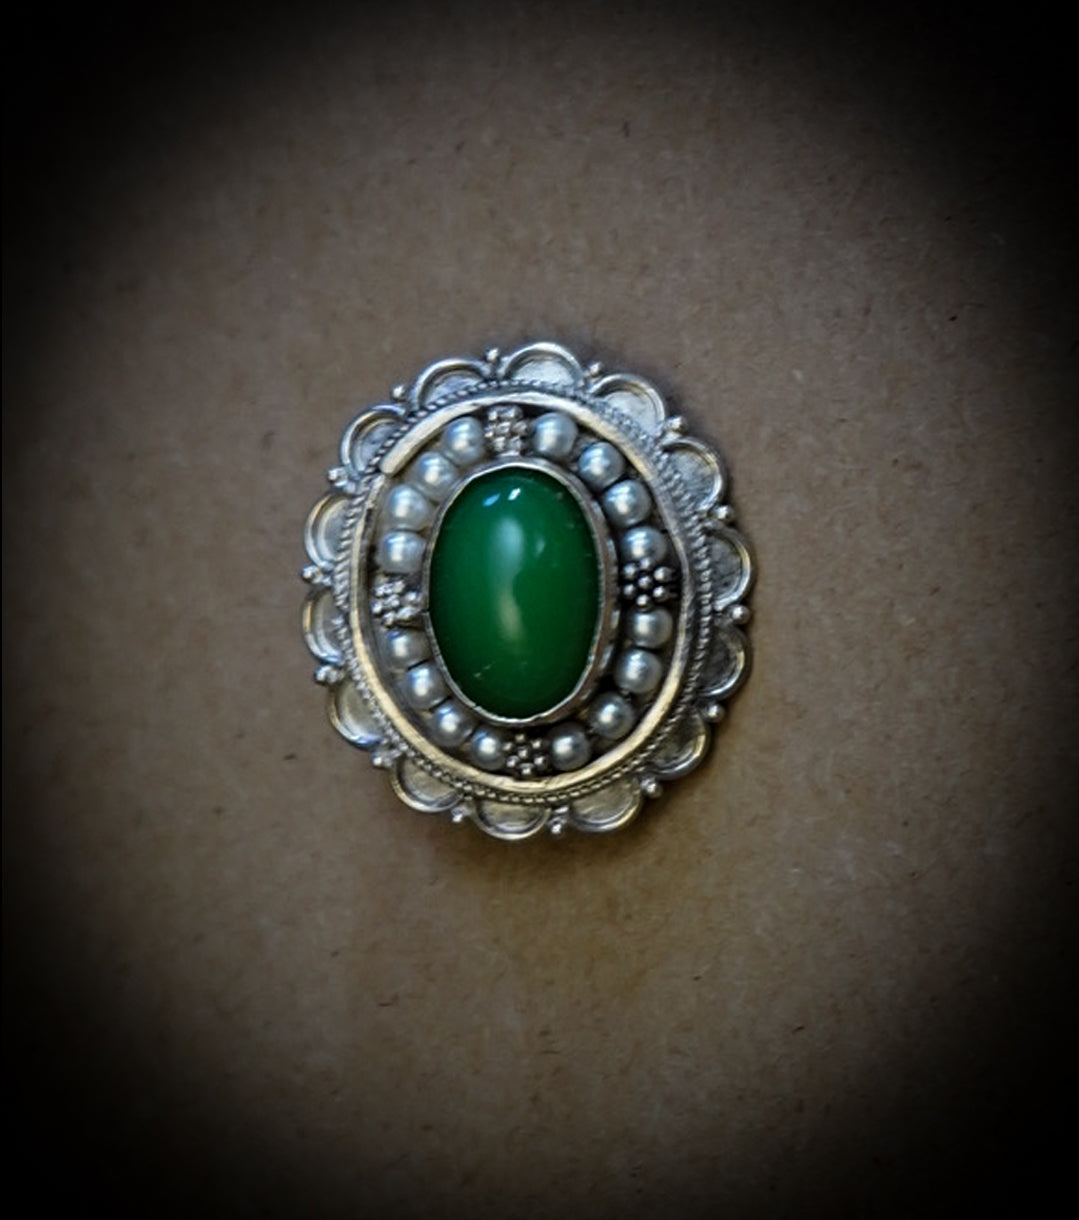 925 Sterling Silver and Green Onyx Brooch/Pendant Necklace